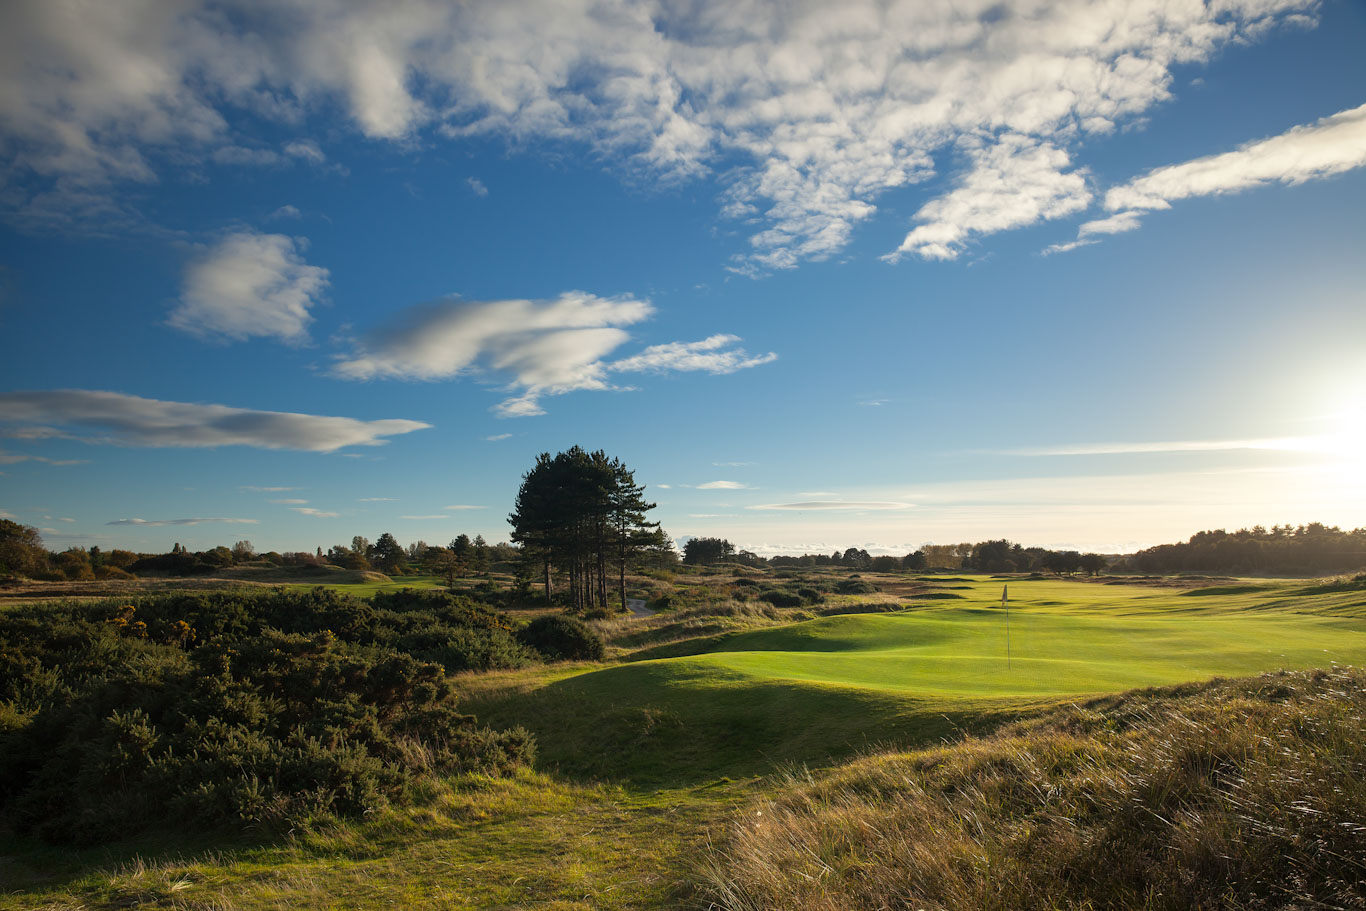 Stunning setting for Southport and Ainsdale Golf Club, England